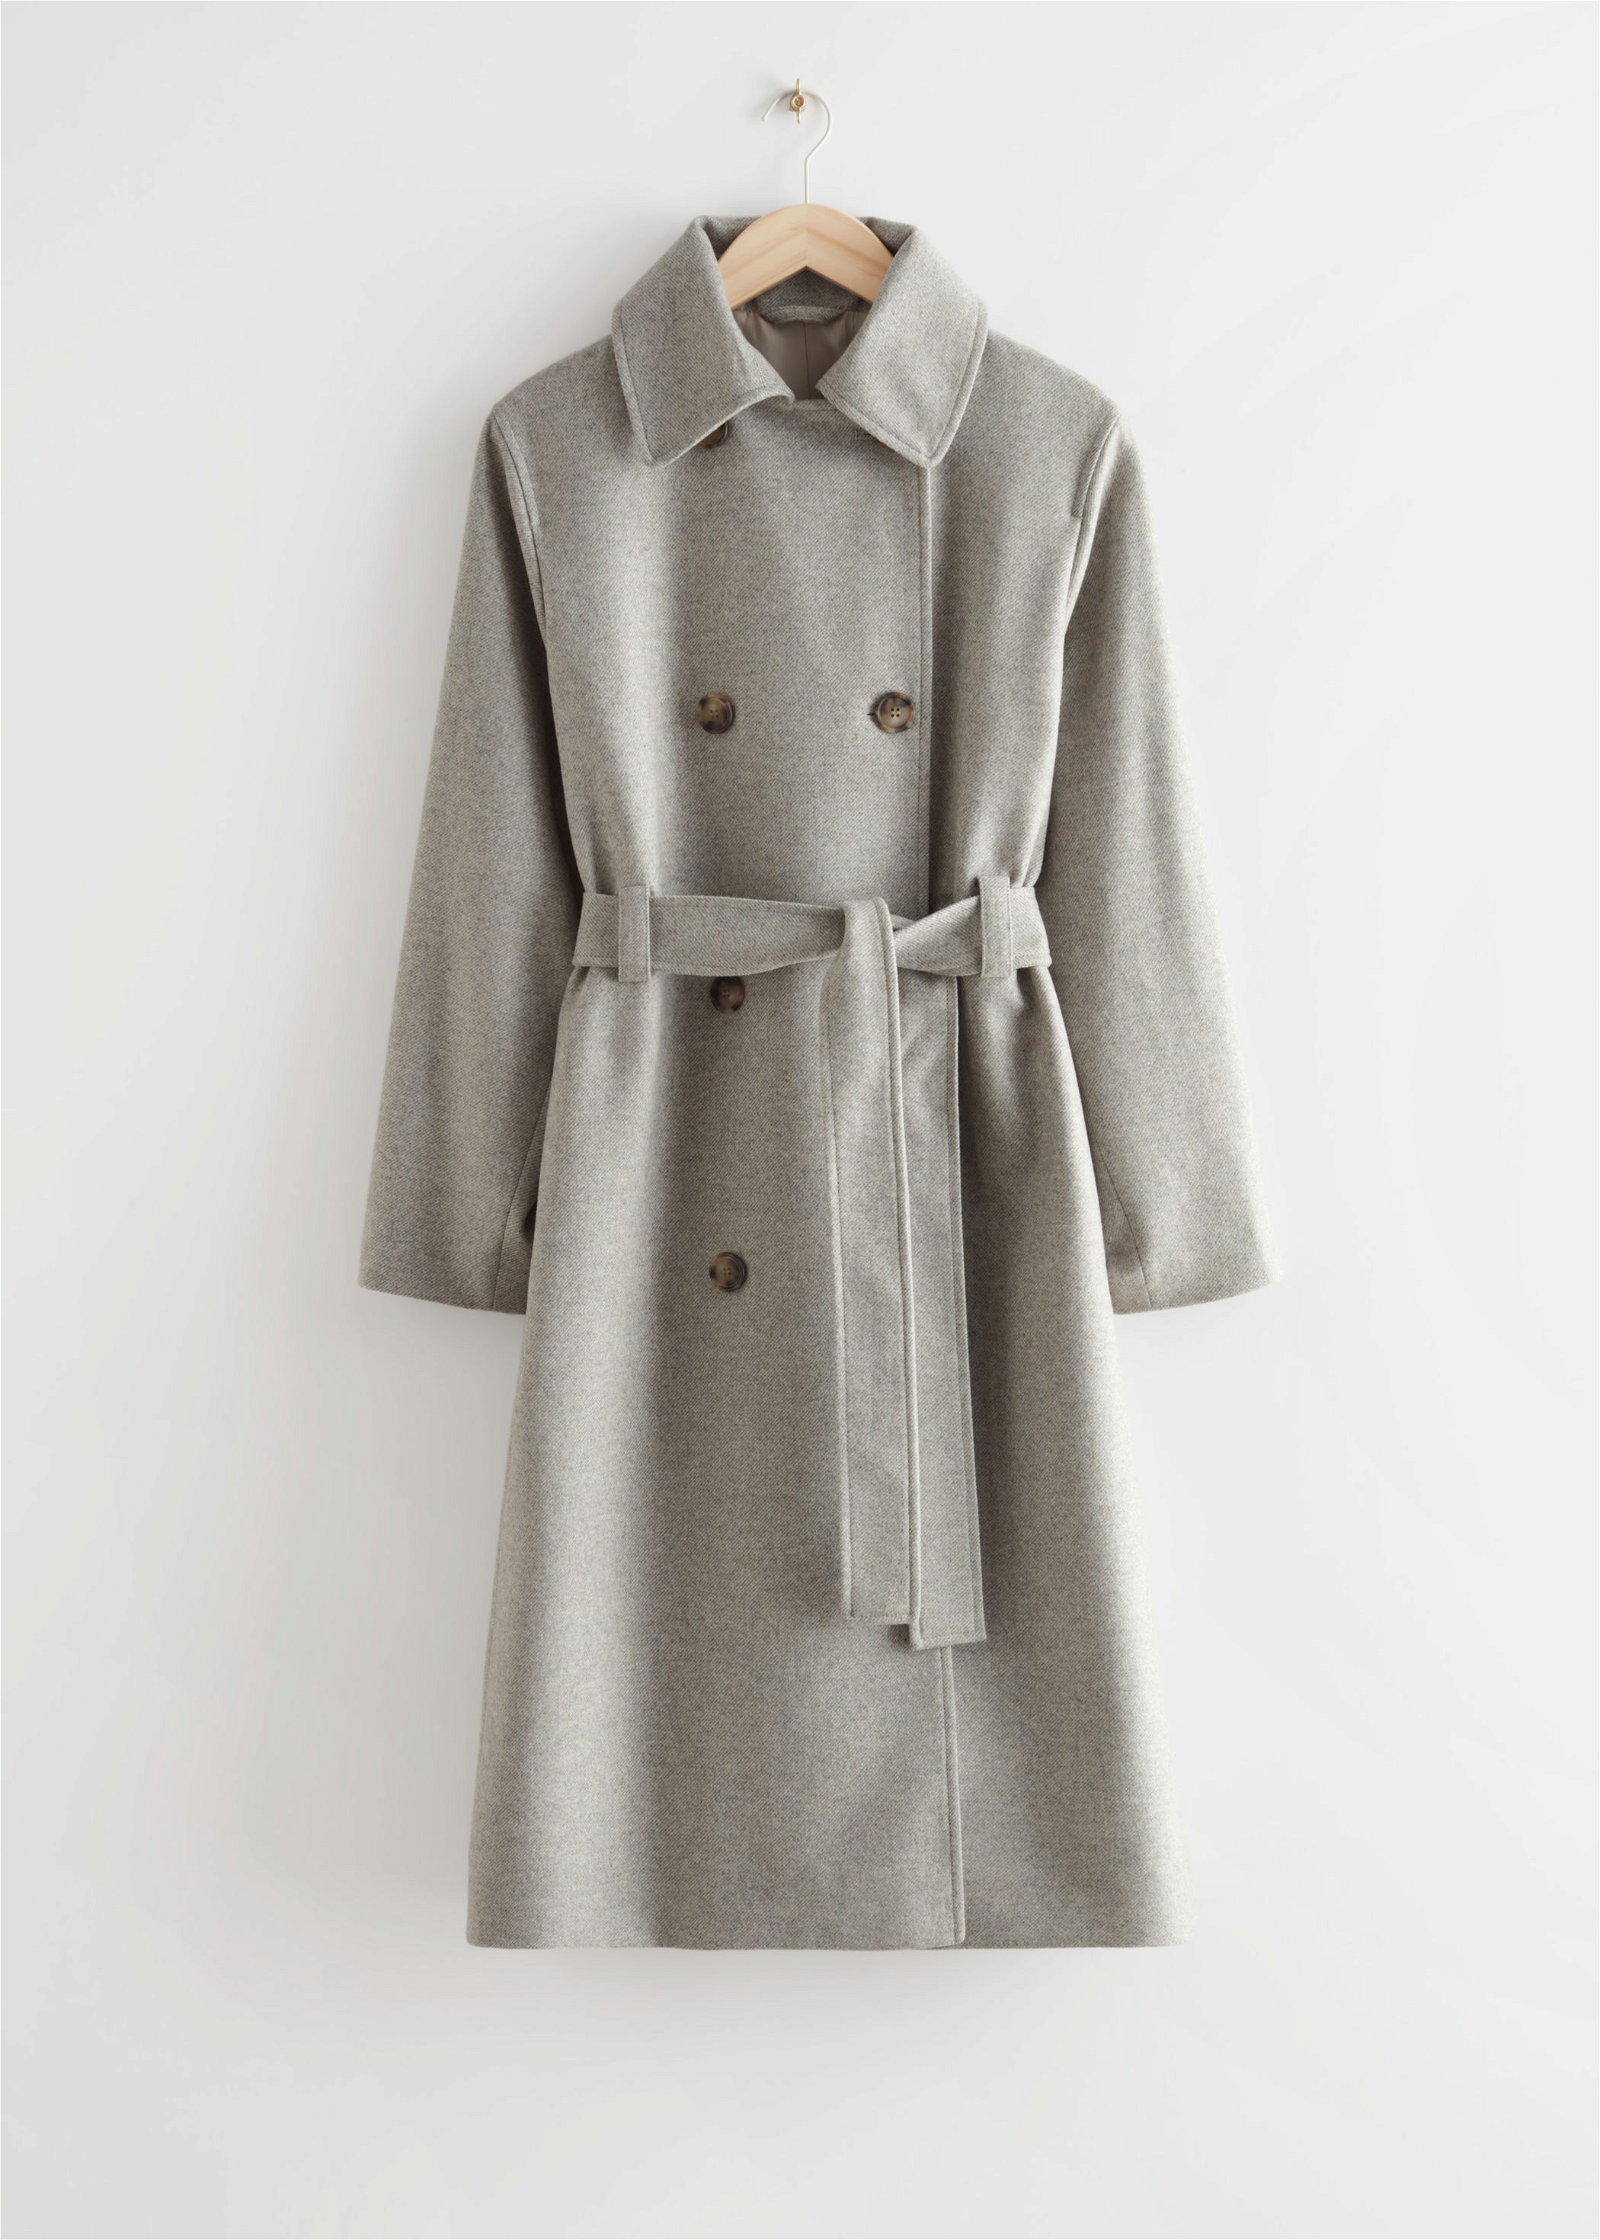 & OTHER STORIES Relaxed Wool Blend Trench Coat in Grey | Endource